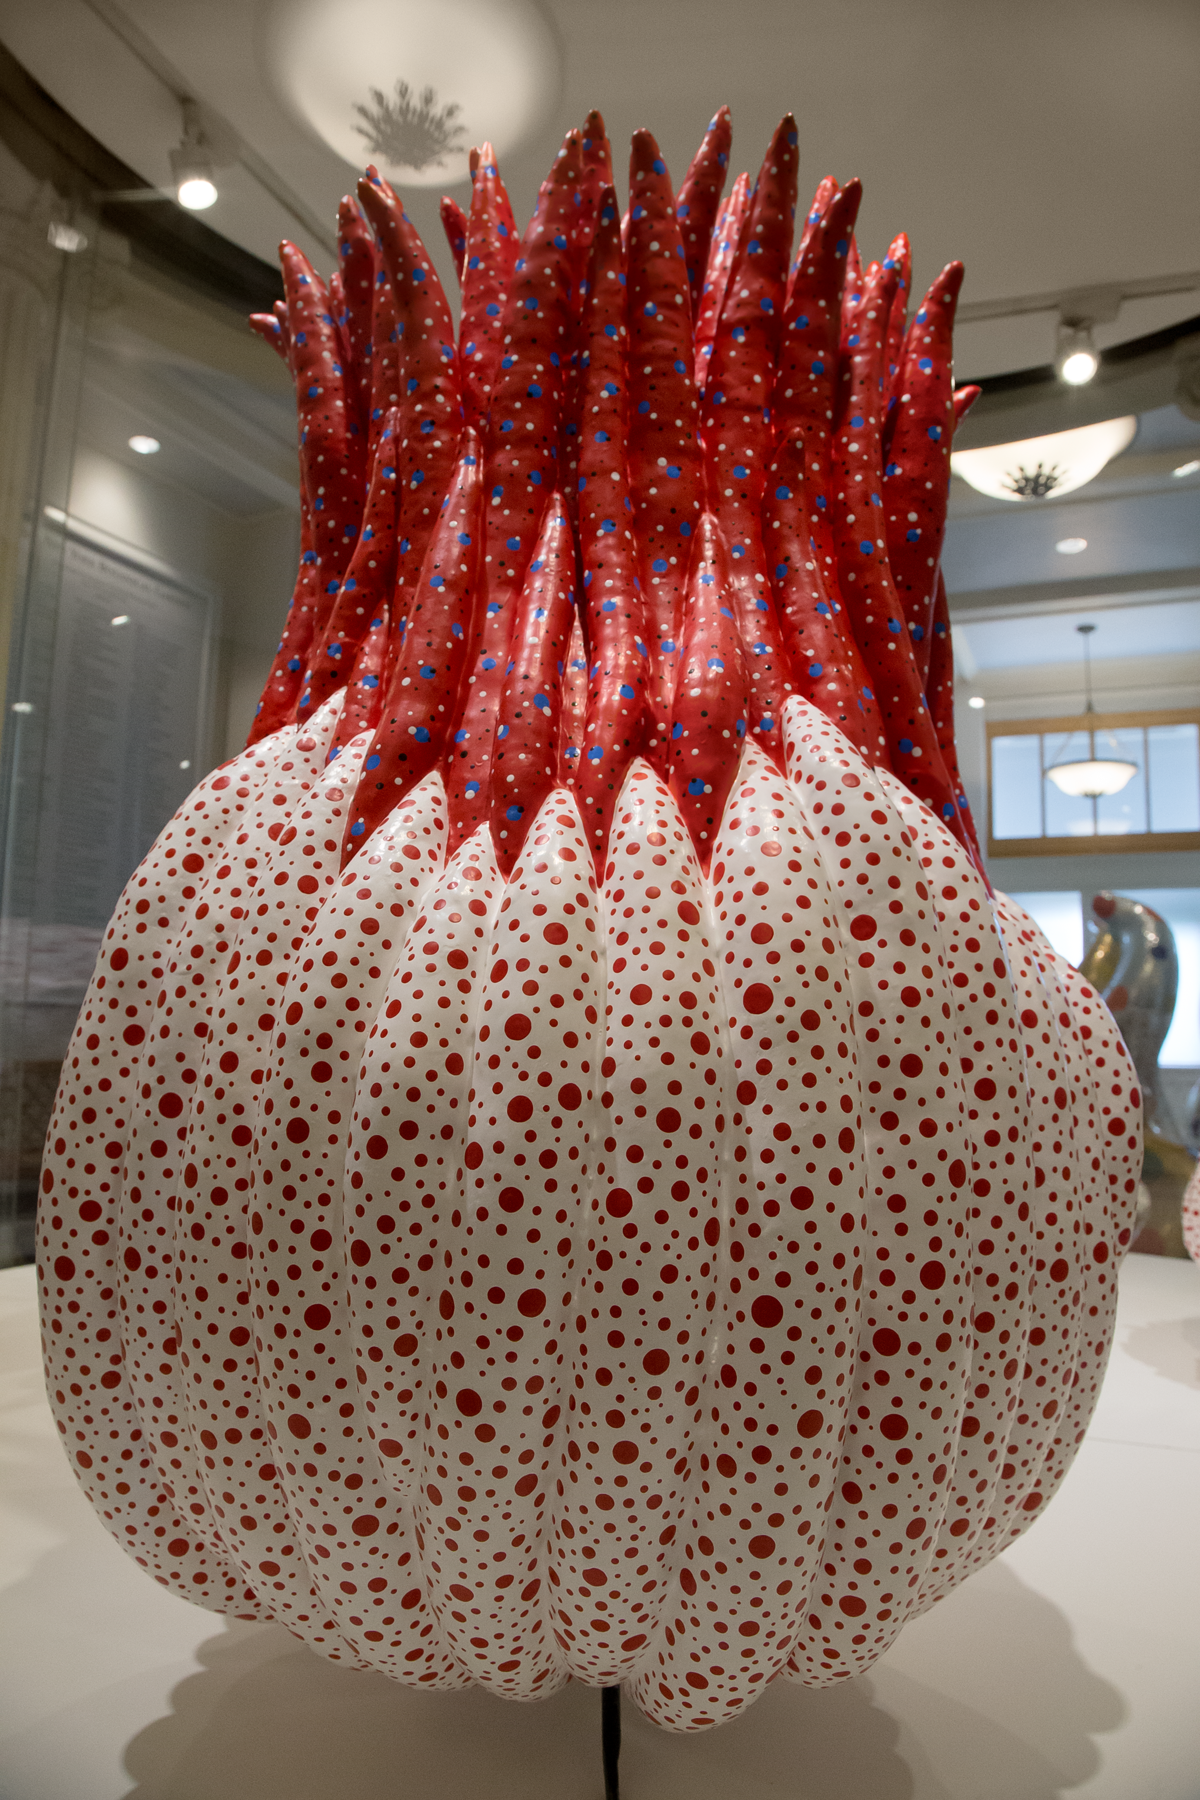 this gourd with hair .. a huge white bodied, red haired gourd dotted with multitudes of polka dots mirrors the upward extension of the dancers in the previous picture